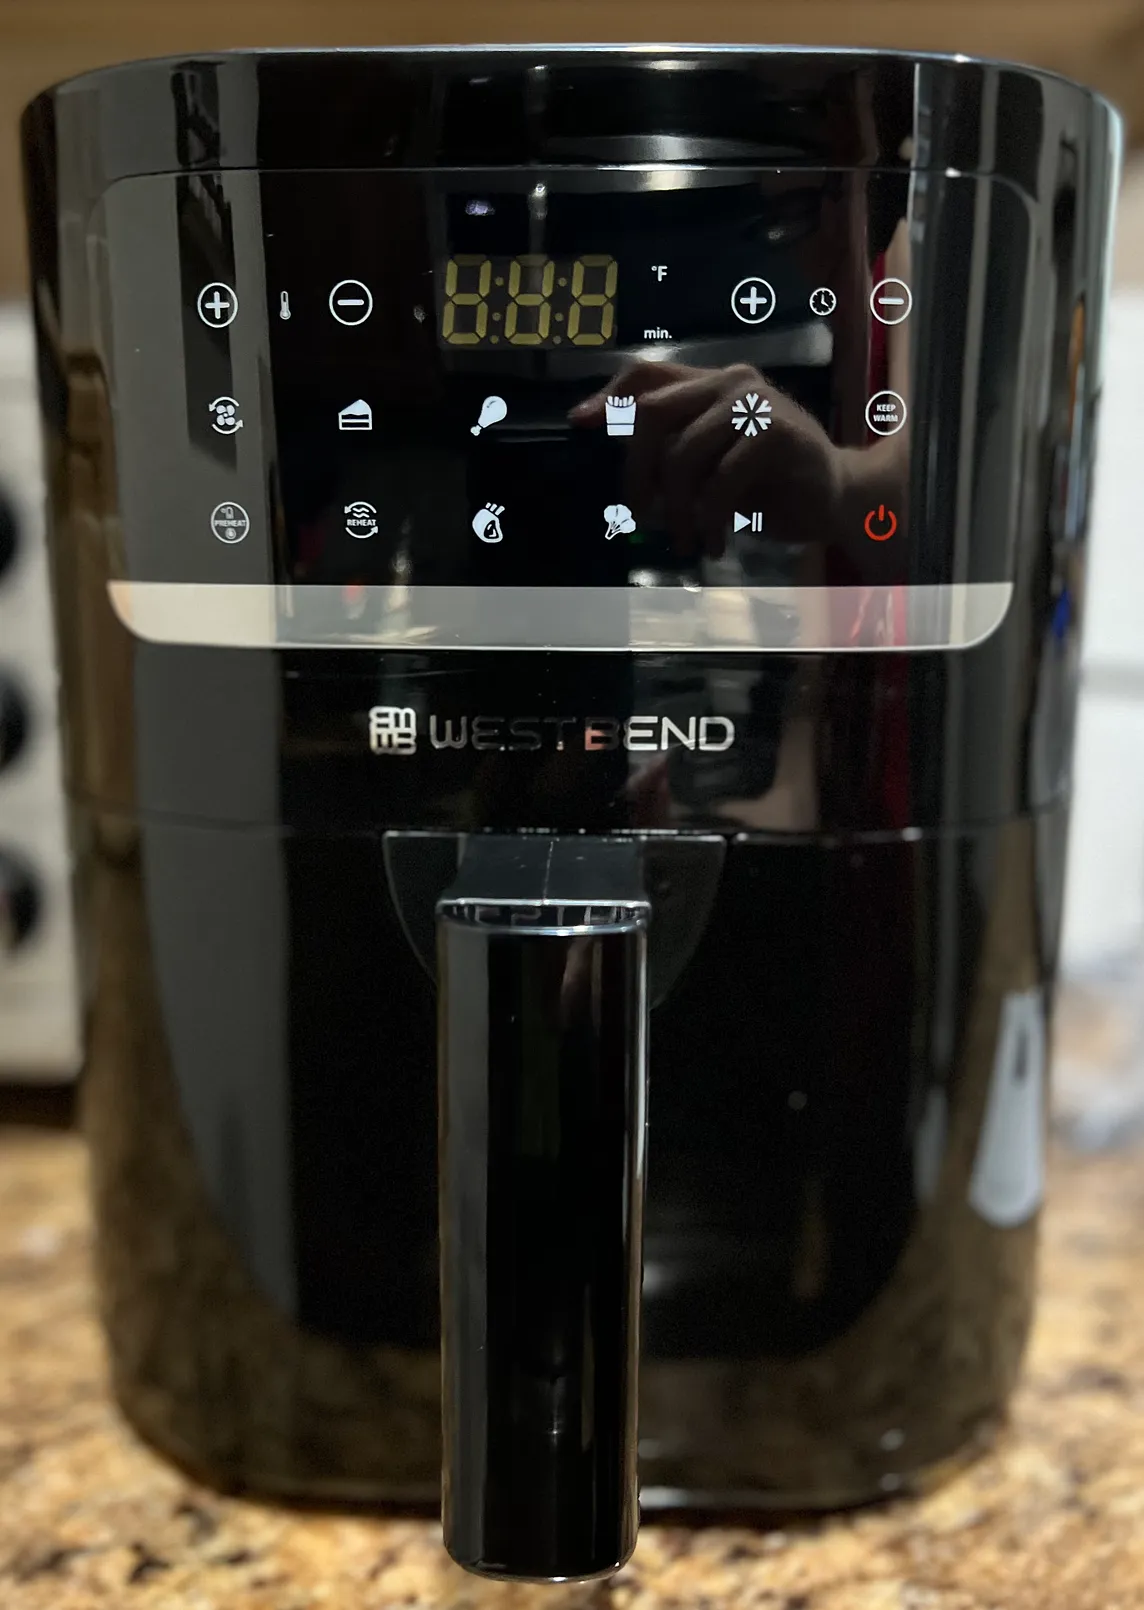 Product Review: West Bend Air Fryer